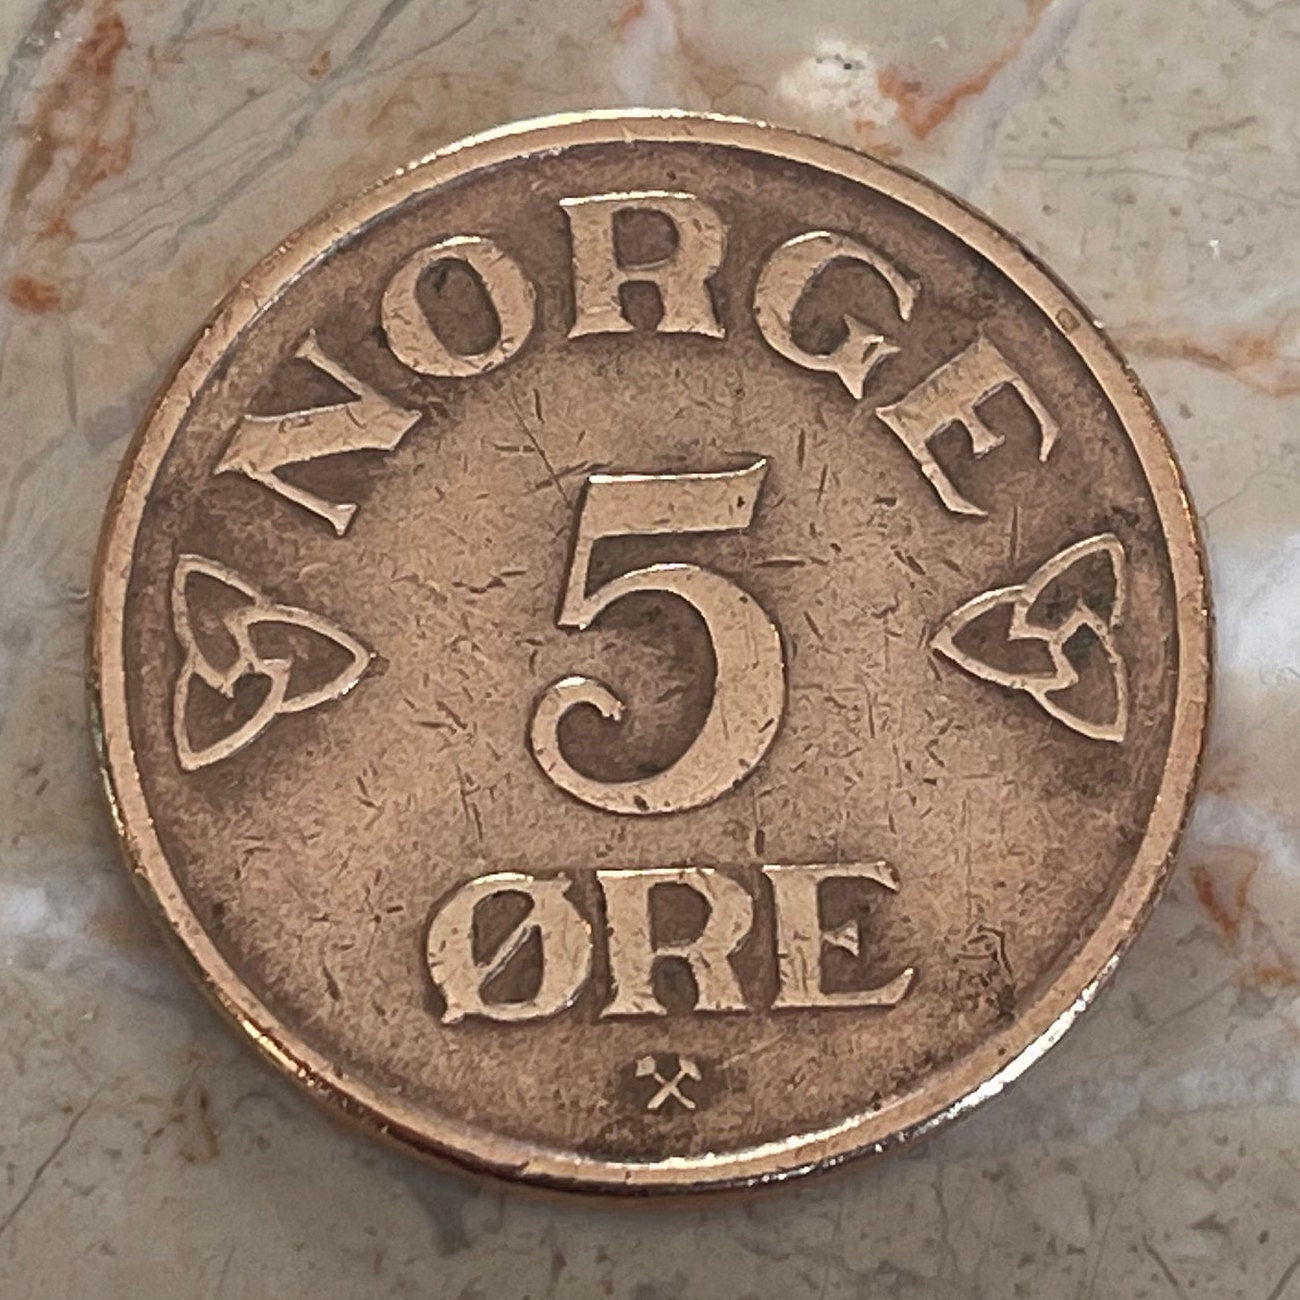 King Haakon 7 Monogram 5 Ore Norway Authentic Coin Money for Jewelry and Craft Making (Haakon VII)